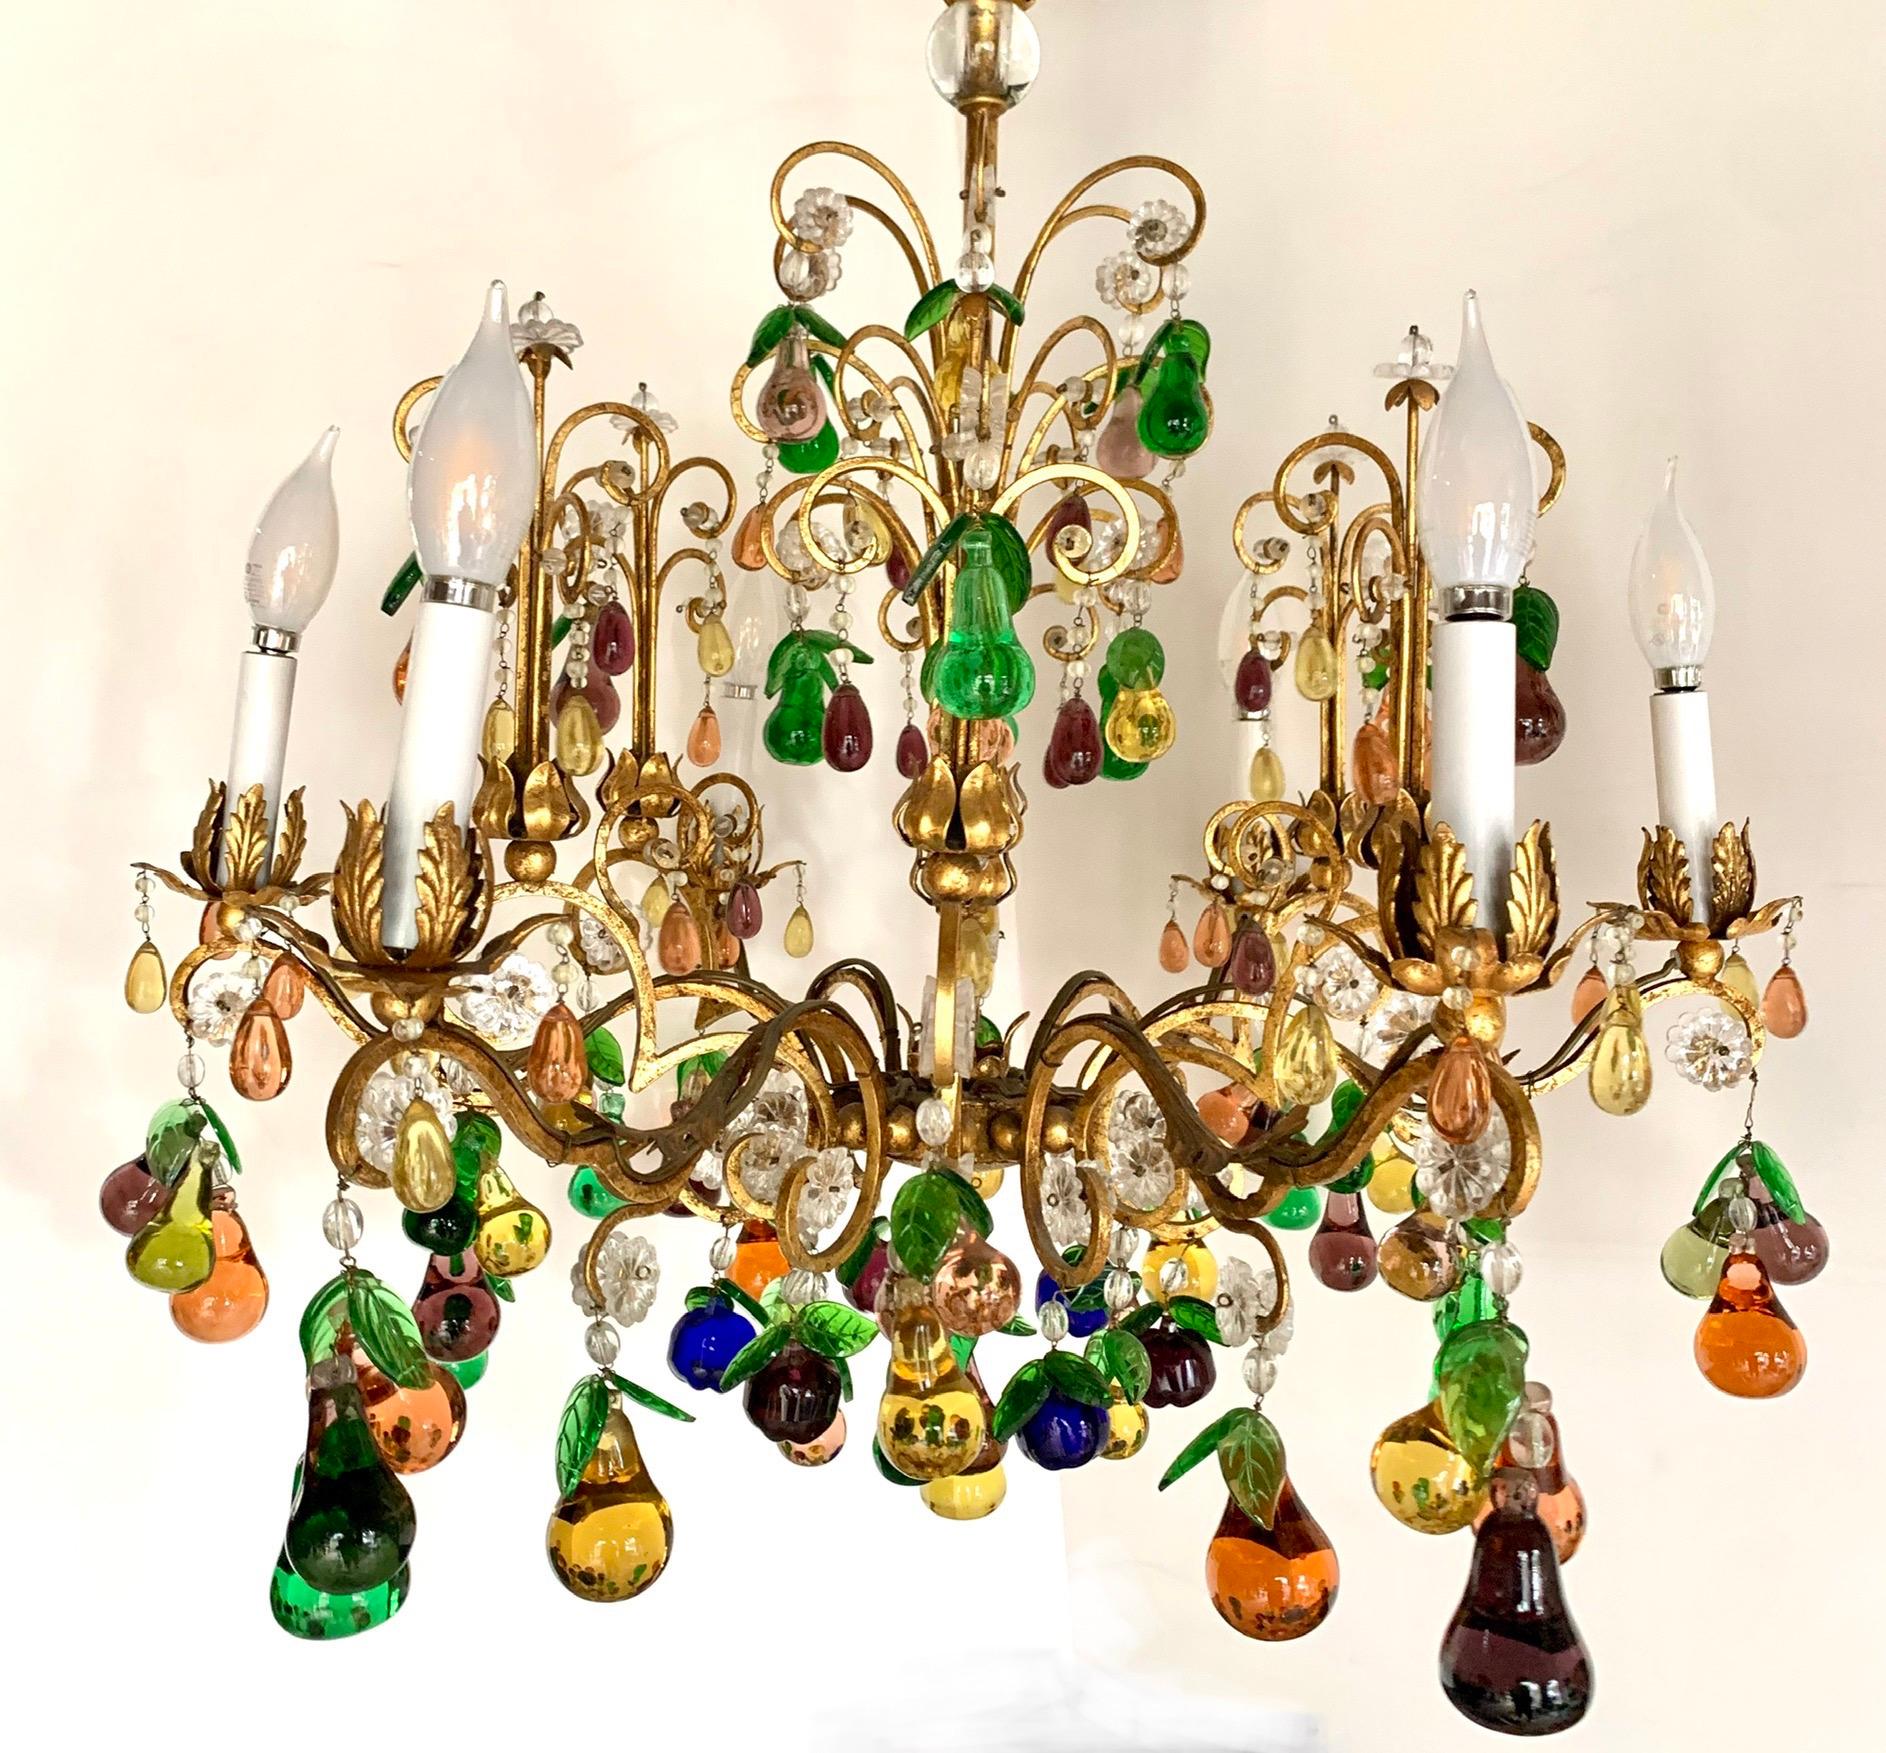 Stunning large gilt metal six light chandelier features hundreds of multi-colored murano glass fruit and crystal drops. Wired and in working condition. Includes ceiling cap and adjustable chain so chandelier hangs 52 inches from top to bottom.